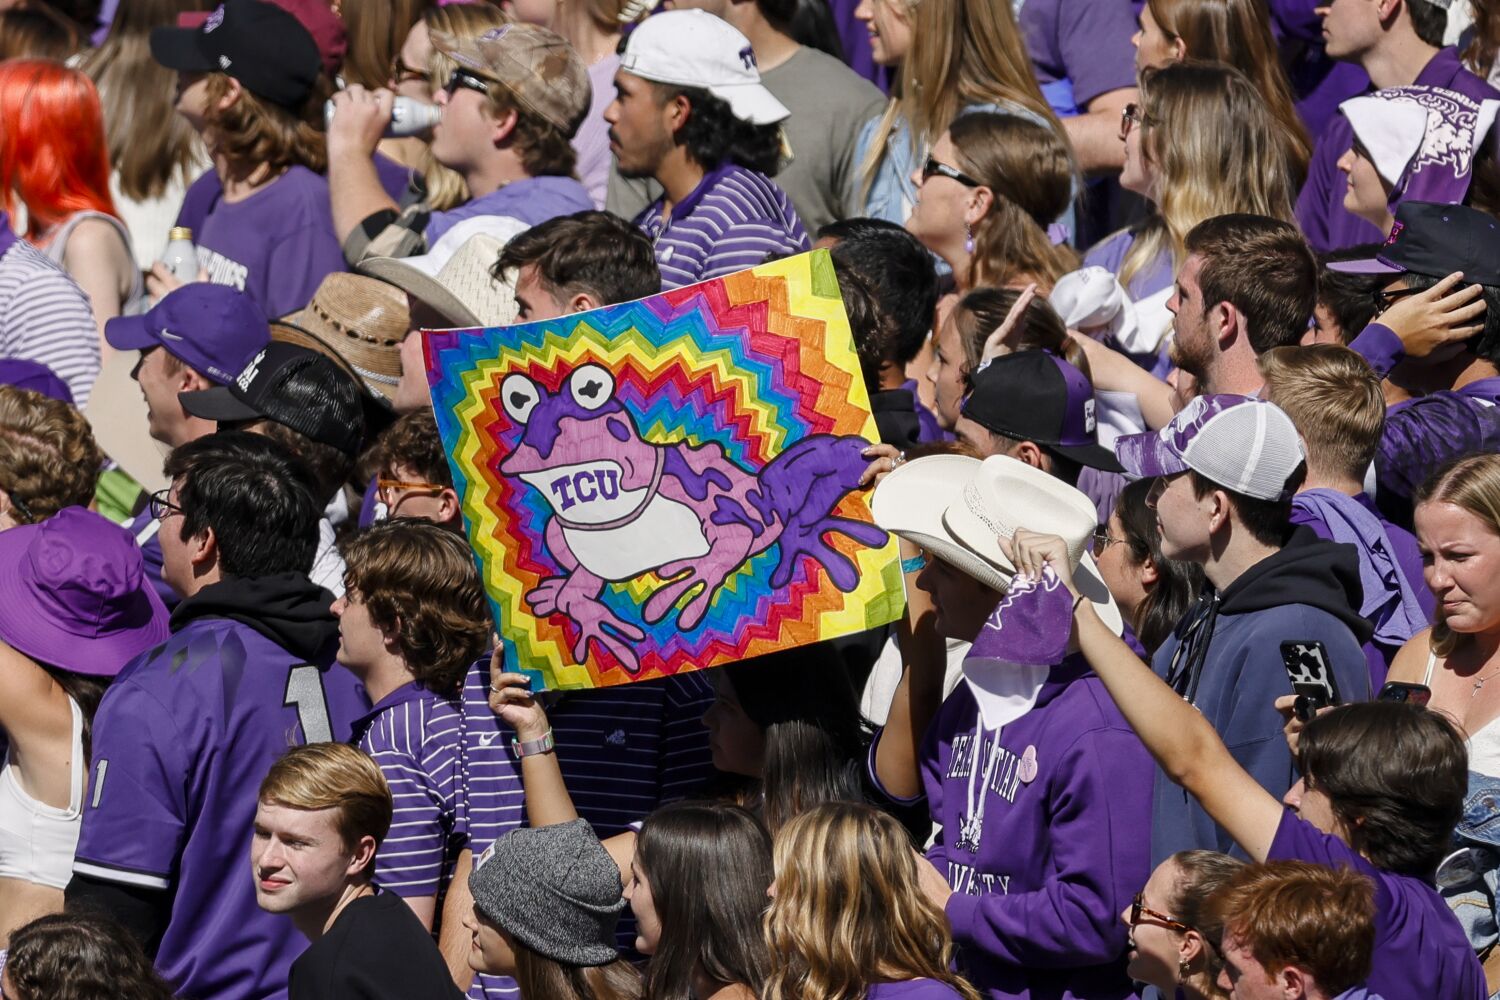 All glory for TCU's playoff run goes to the Hypnotoad